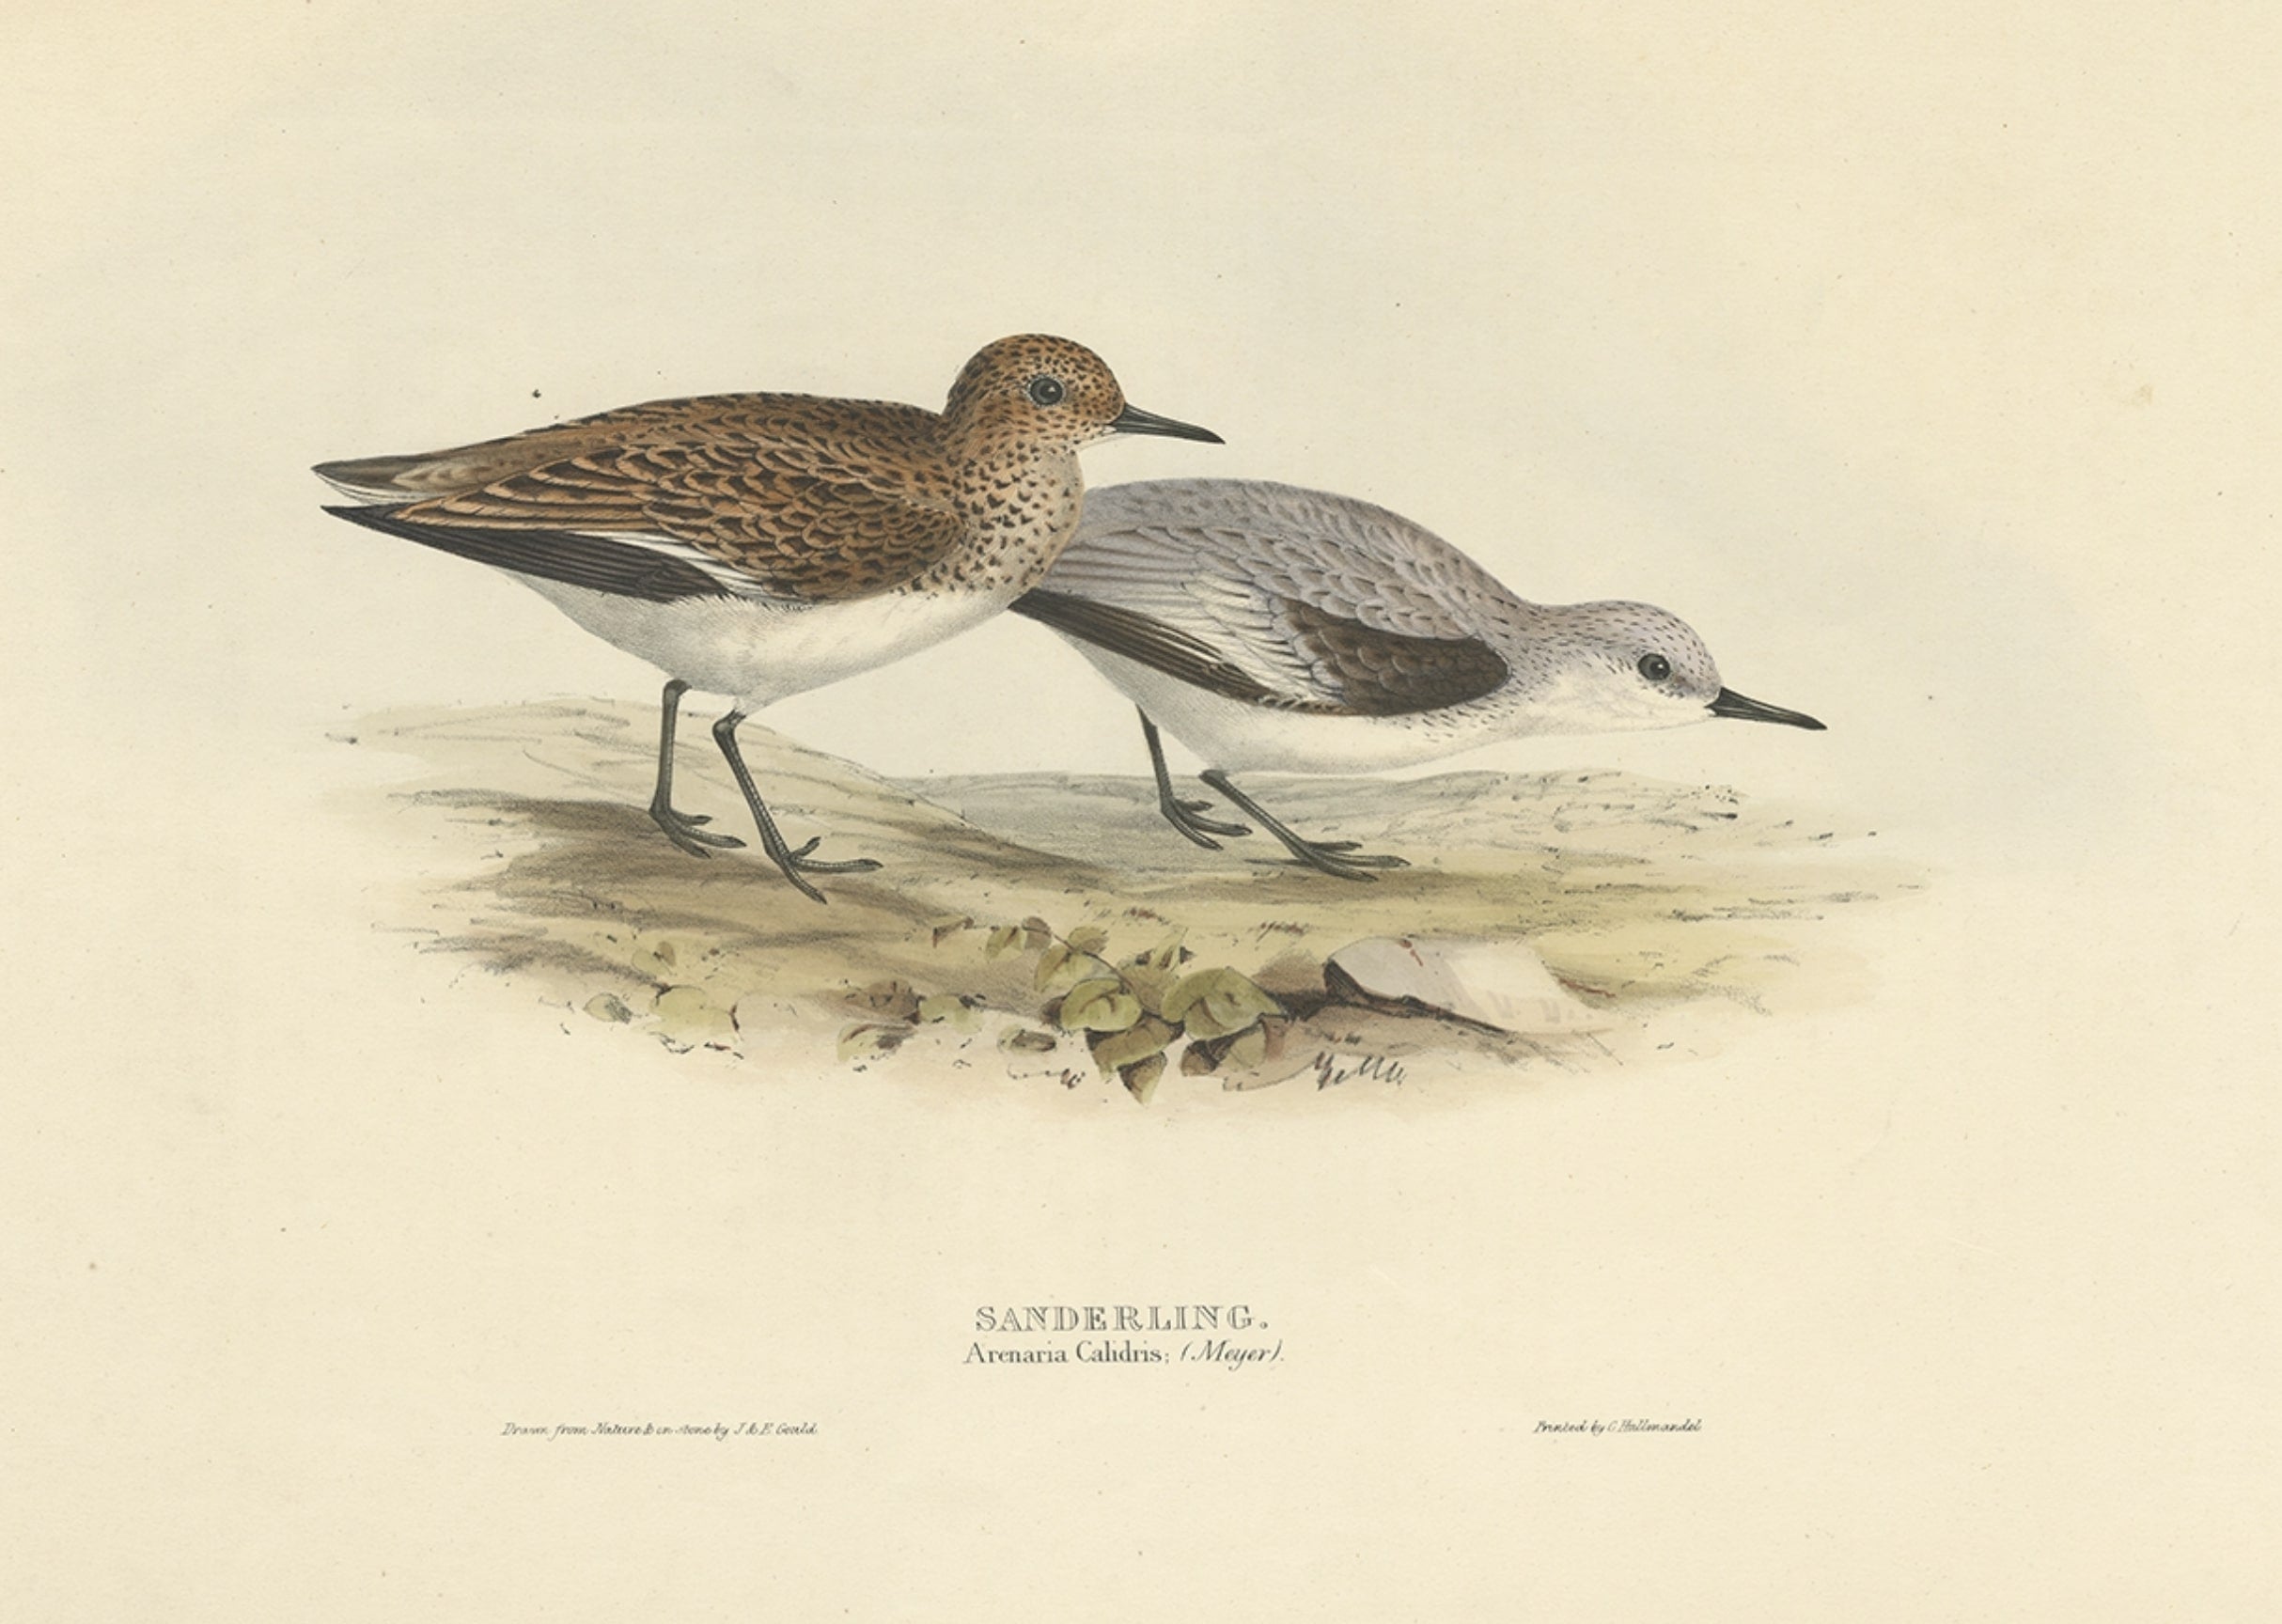 Antique Bird Print of The Sanderling by Gould, 1832